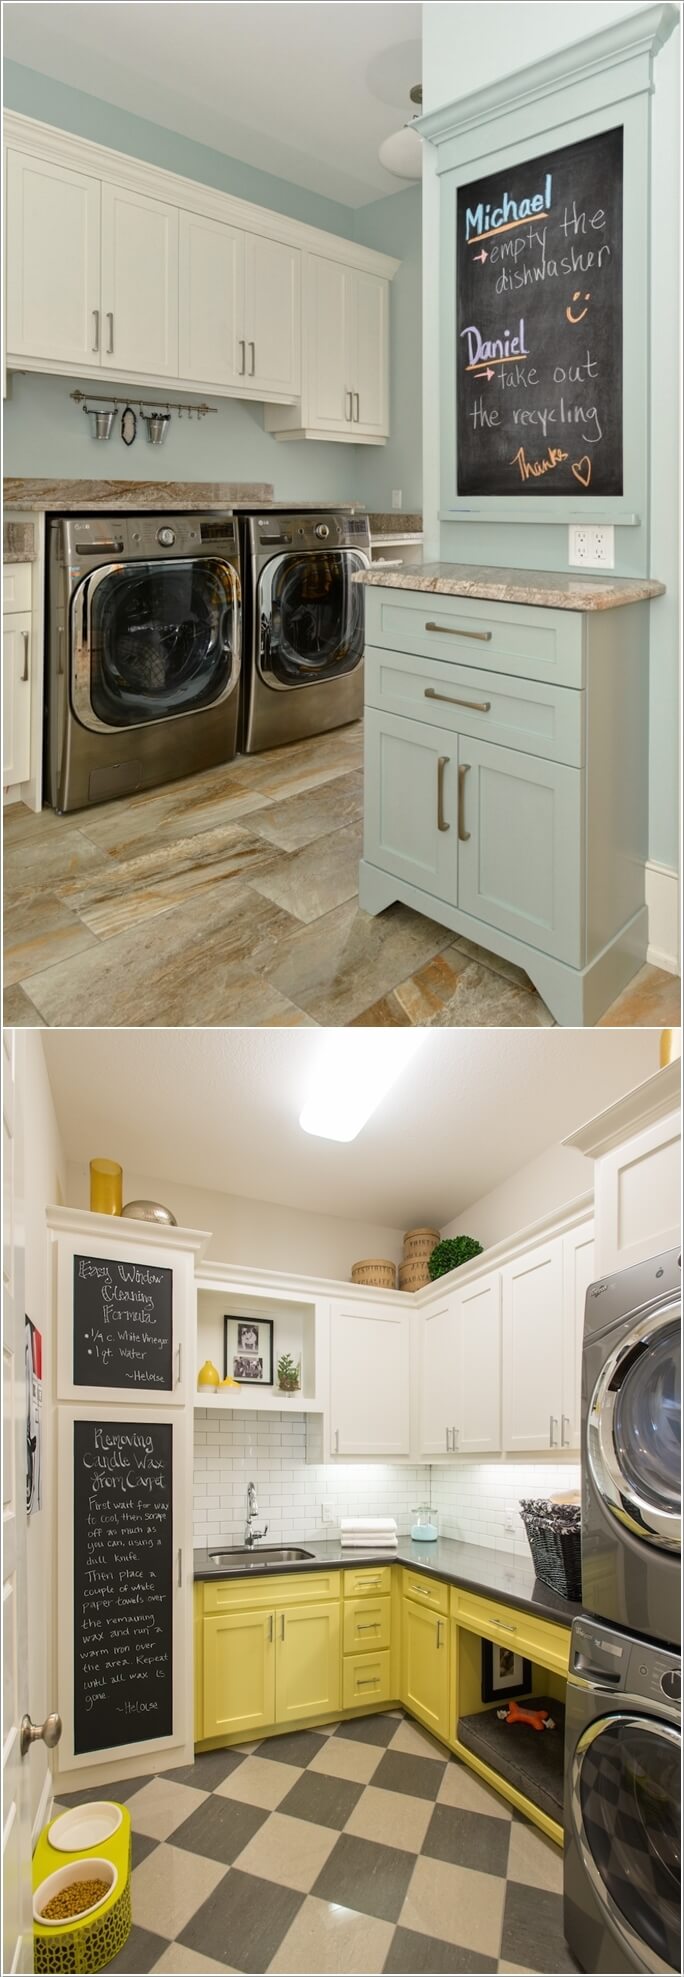 15-interesting-features-to-add-to-your-laundry-room-11